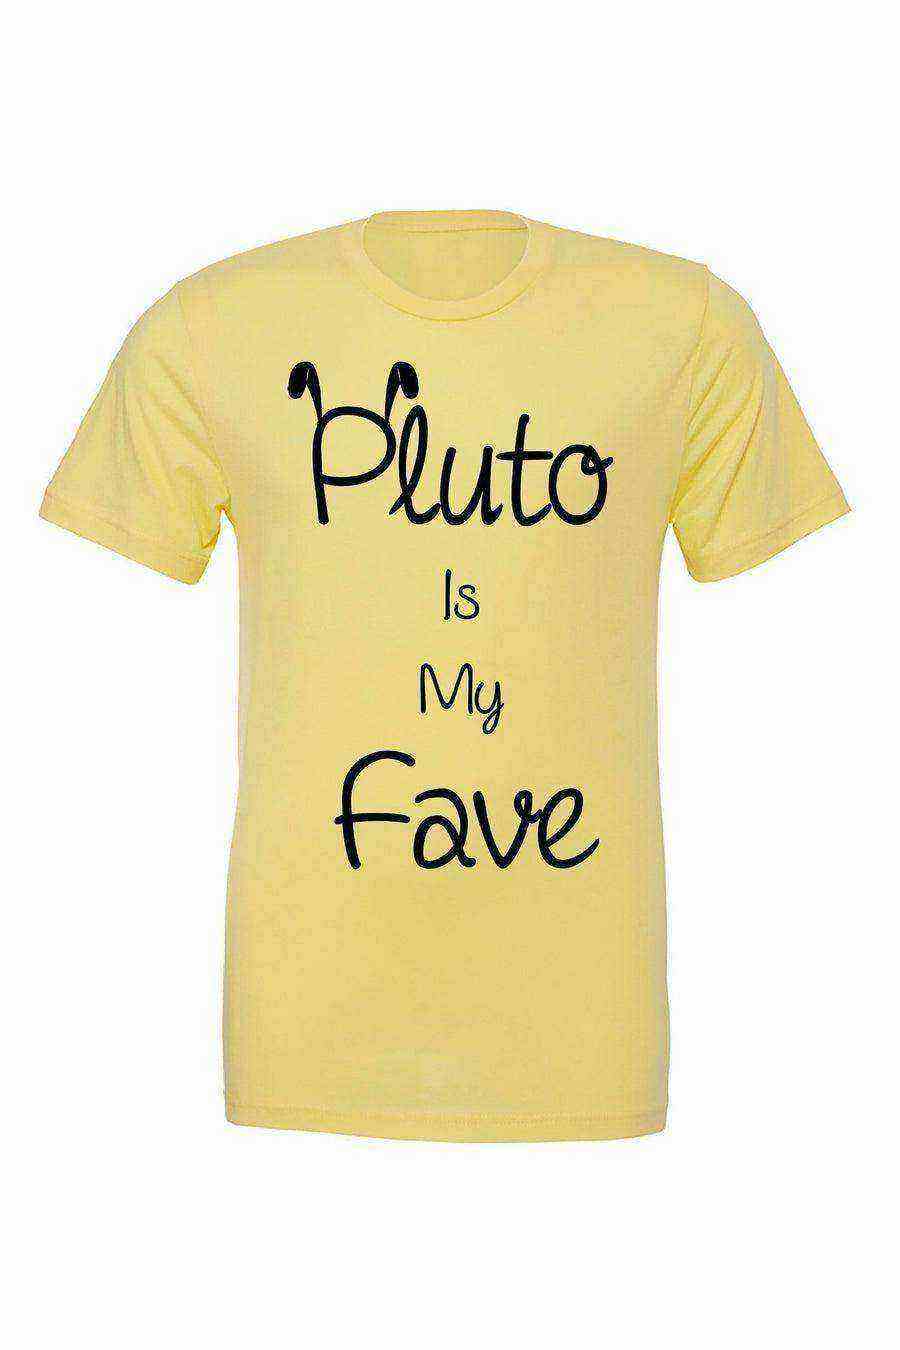 Pluto is my Fave Shirt - Dylan's Tees